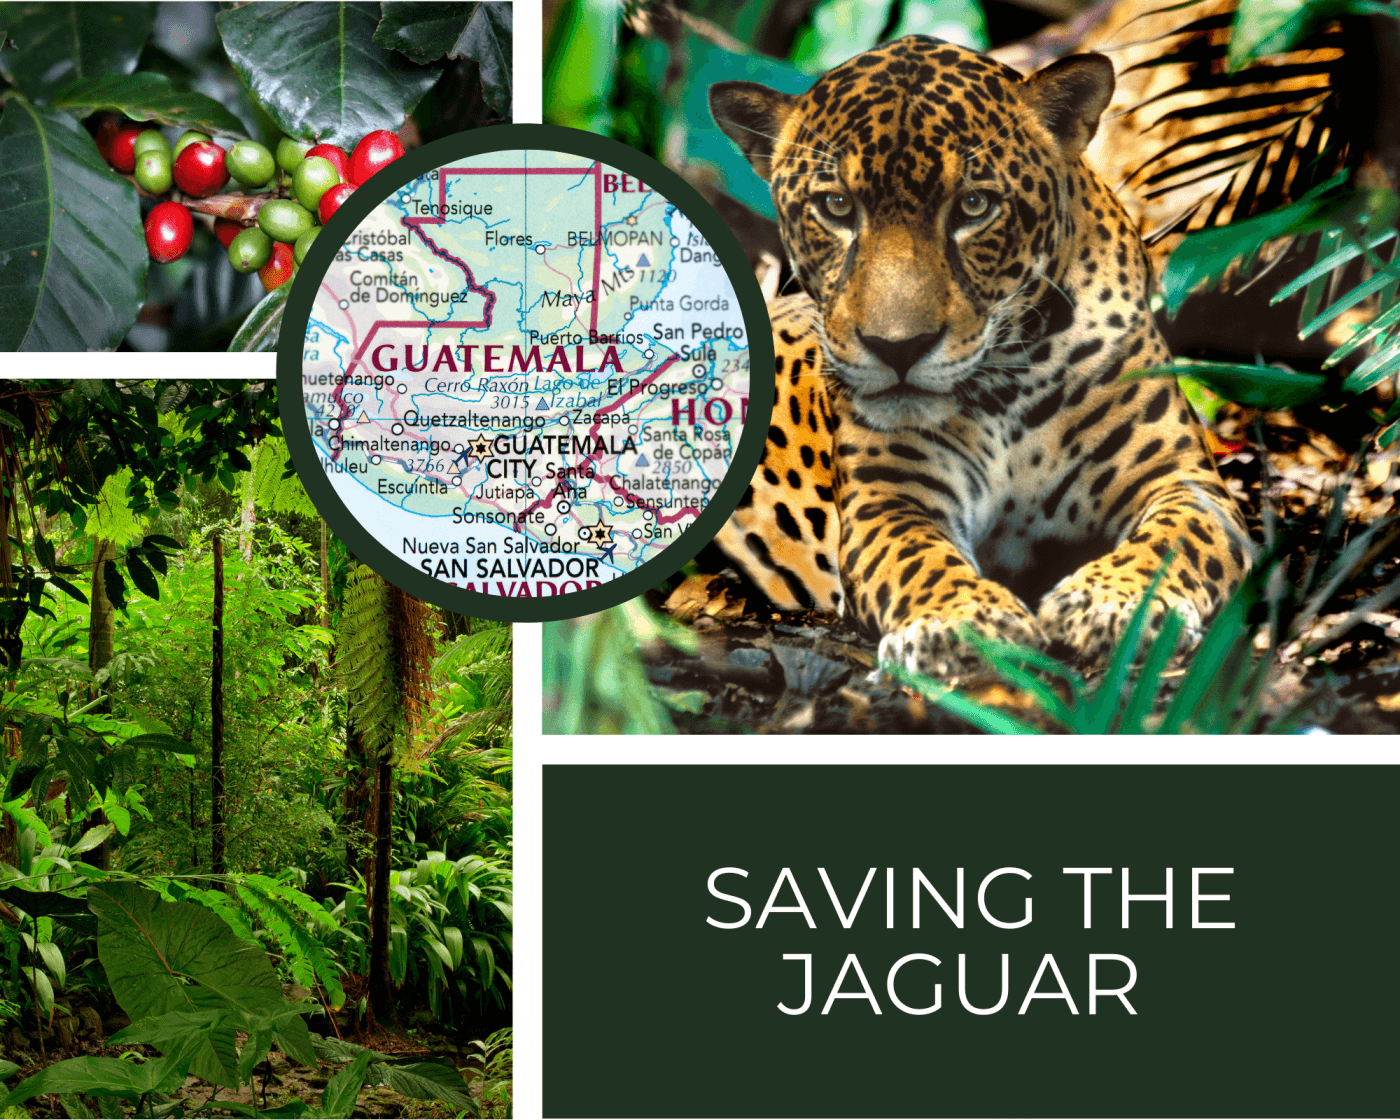 In the top left is a coffee plant, in the bottom left is a rainforest. In the top right is a jaguar, and in the bottom right is text saying saving the jaguar. In the center is Guatemala on a map.